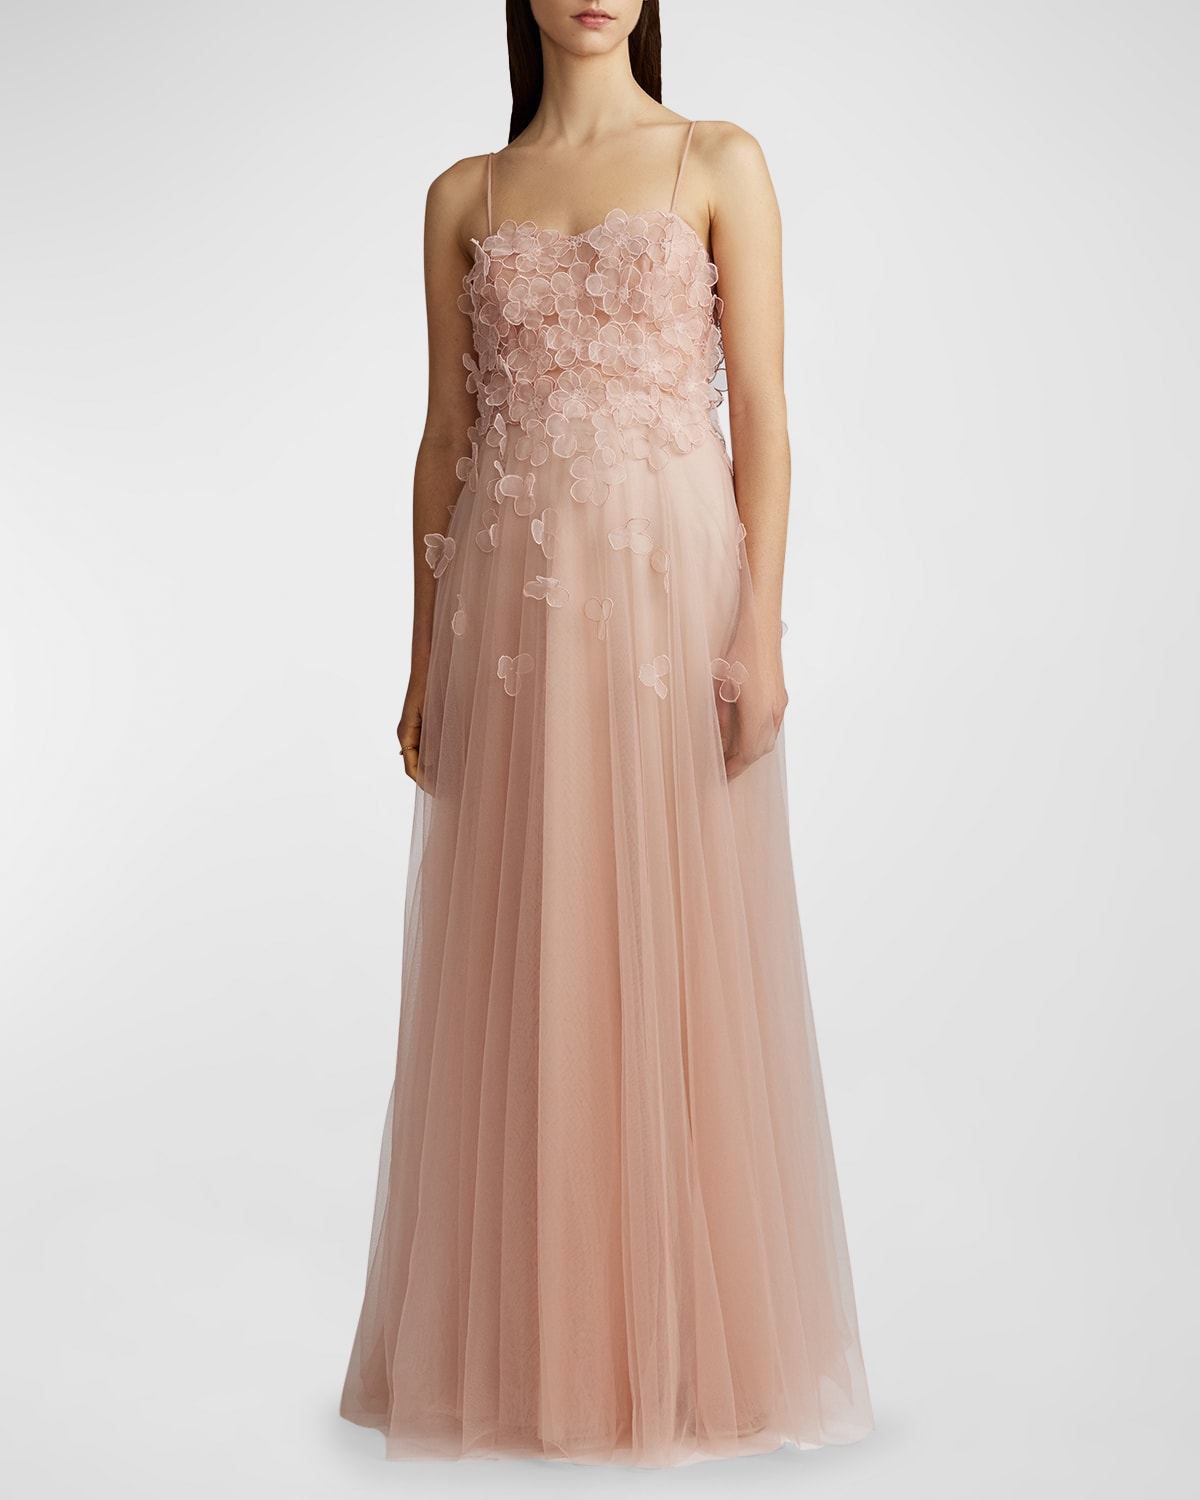 Zac Posen Sleeveless Floral Applique Tulle Gown In Blush